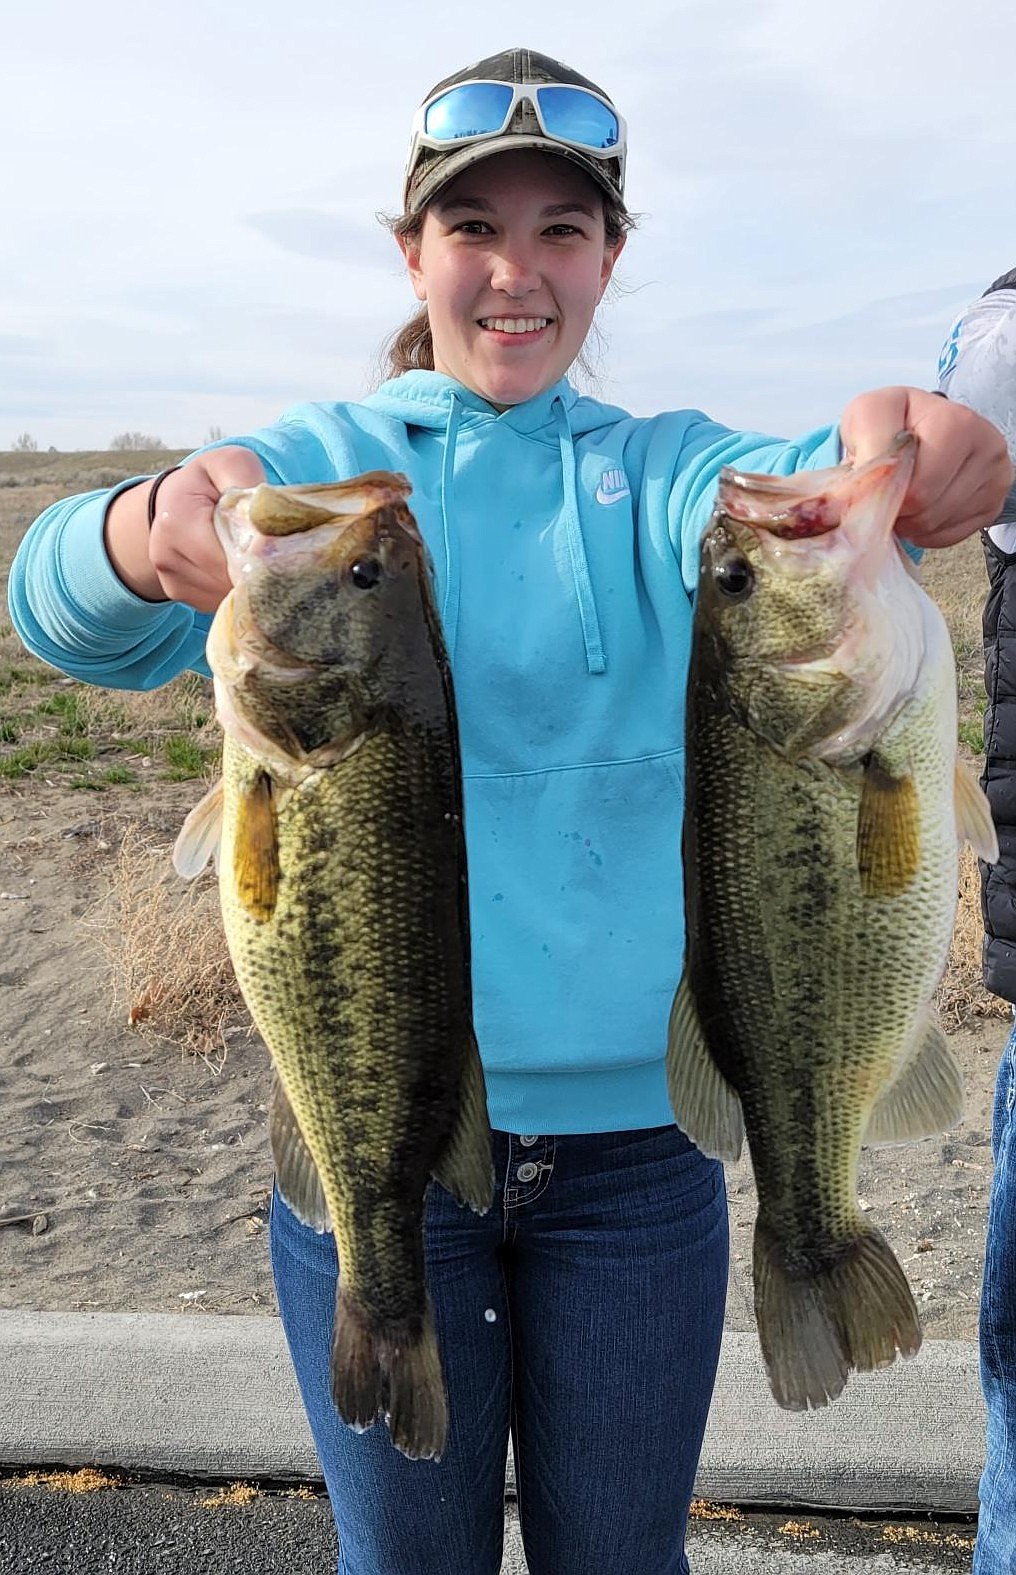 Hannah McCalmant's first official tournament took place in March. Fishing Moses Lake, her biggest catch of the day was a 4.35-pound largemouth bass. She finished in the top 10.